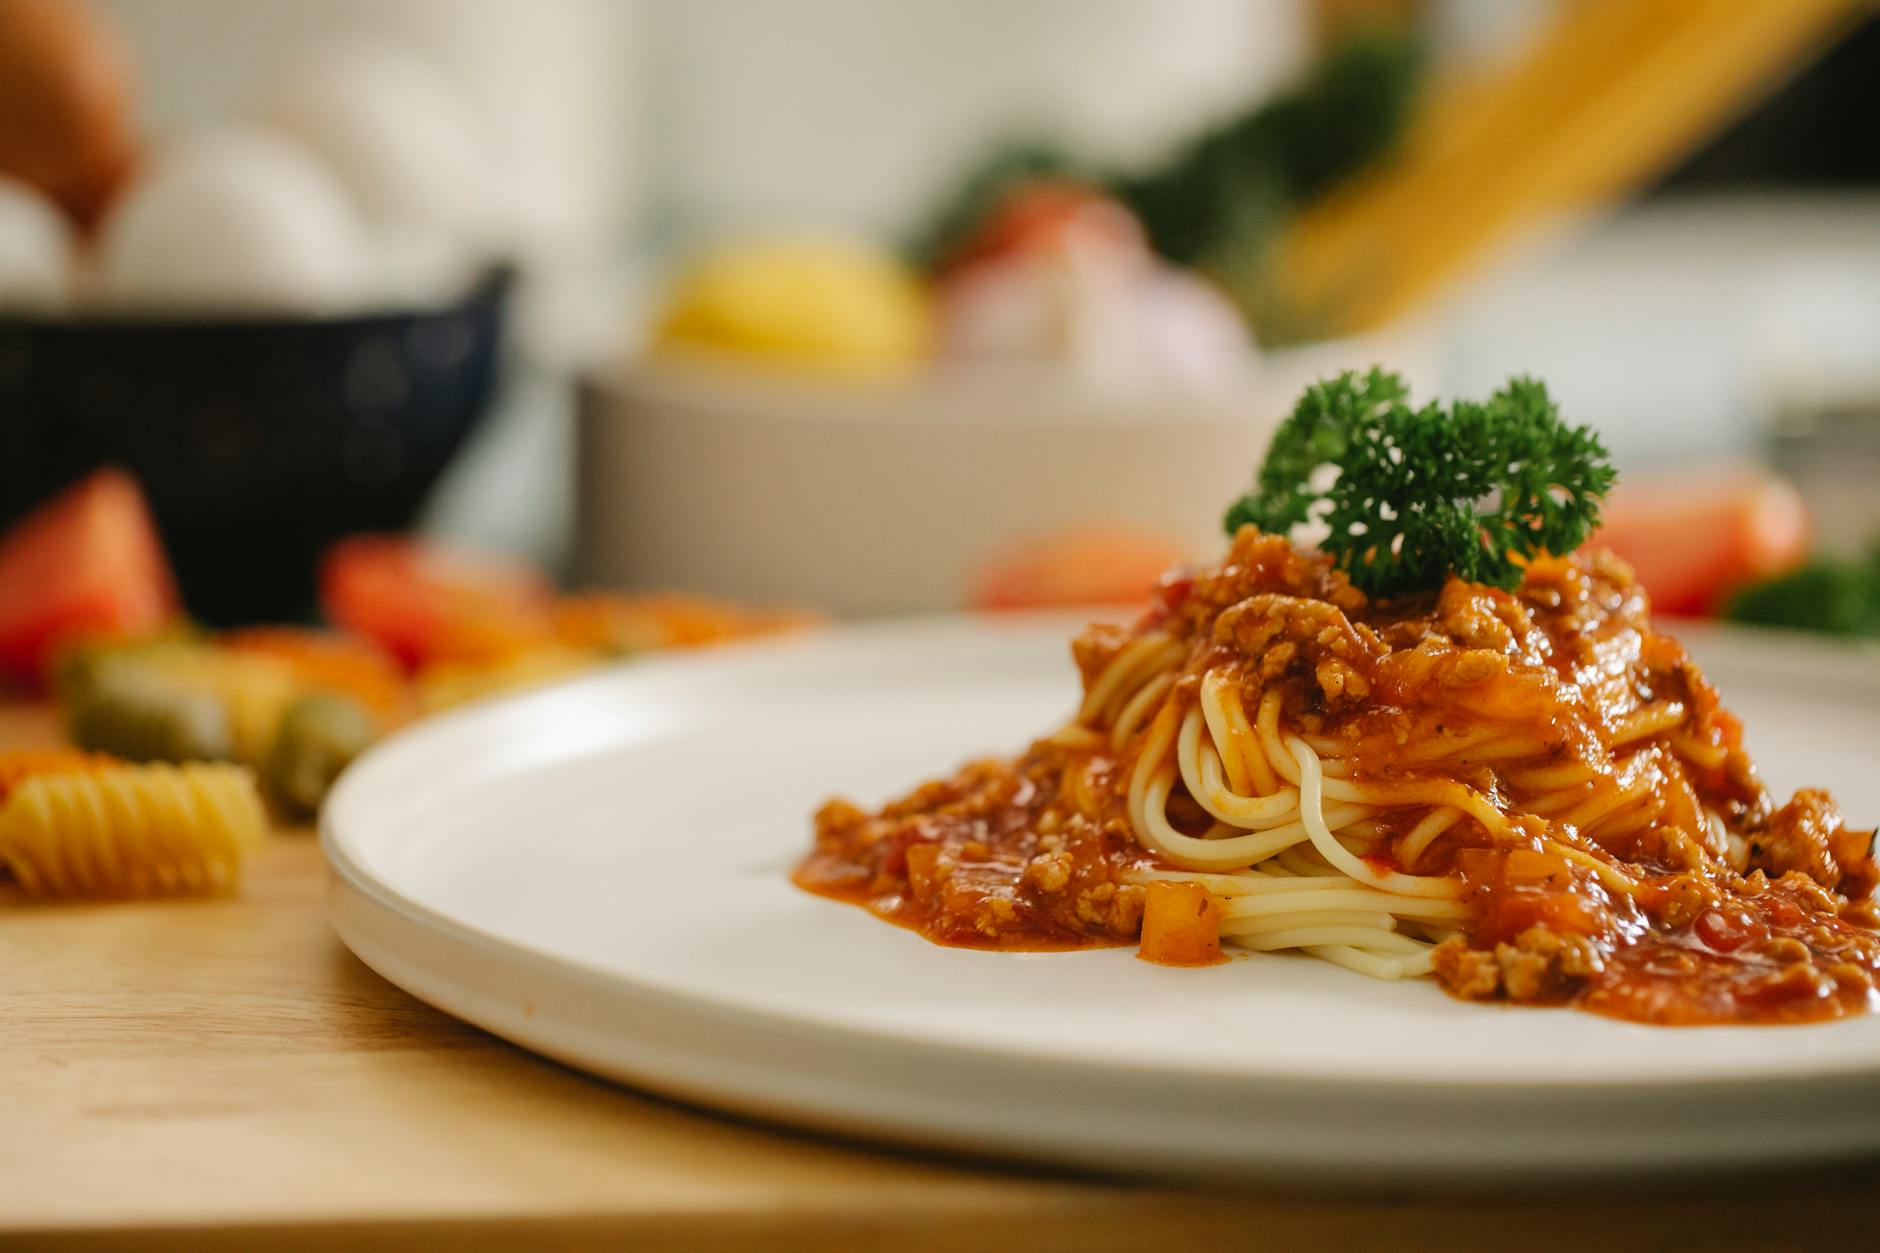 Delicious yummy spaghetti pasta with Bolognese sauce garnished with parsley and served on table in light kitchen